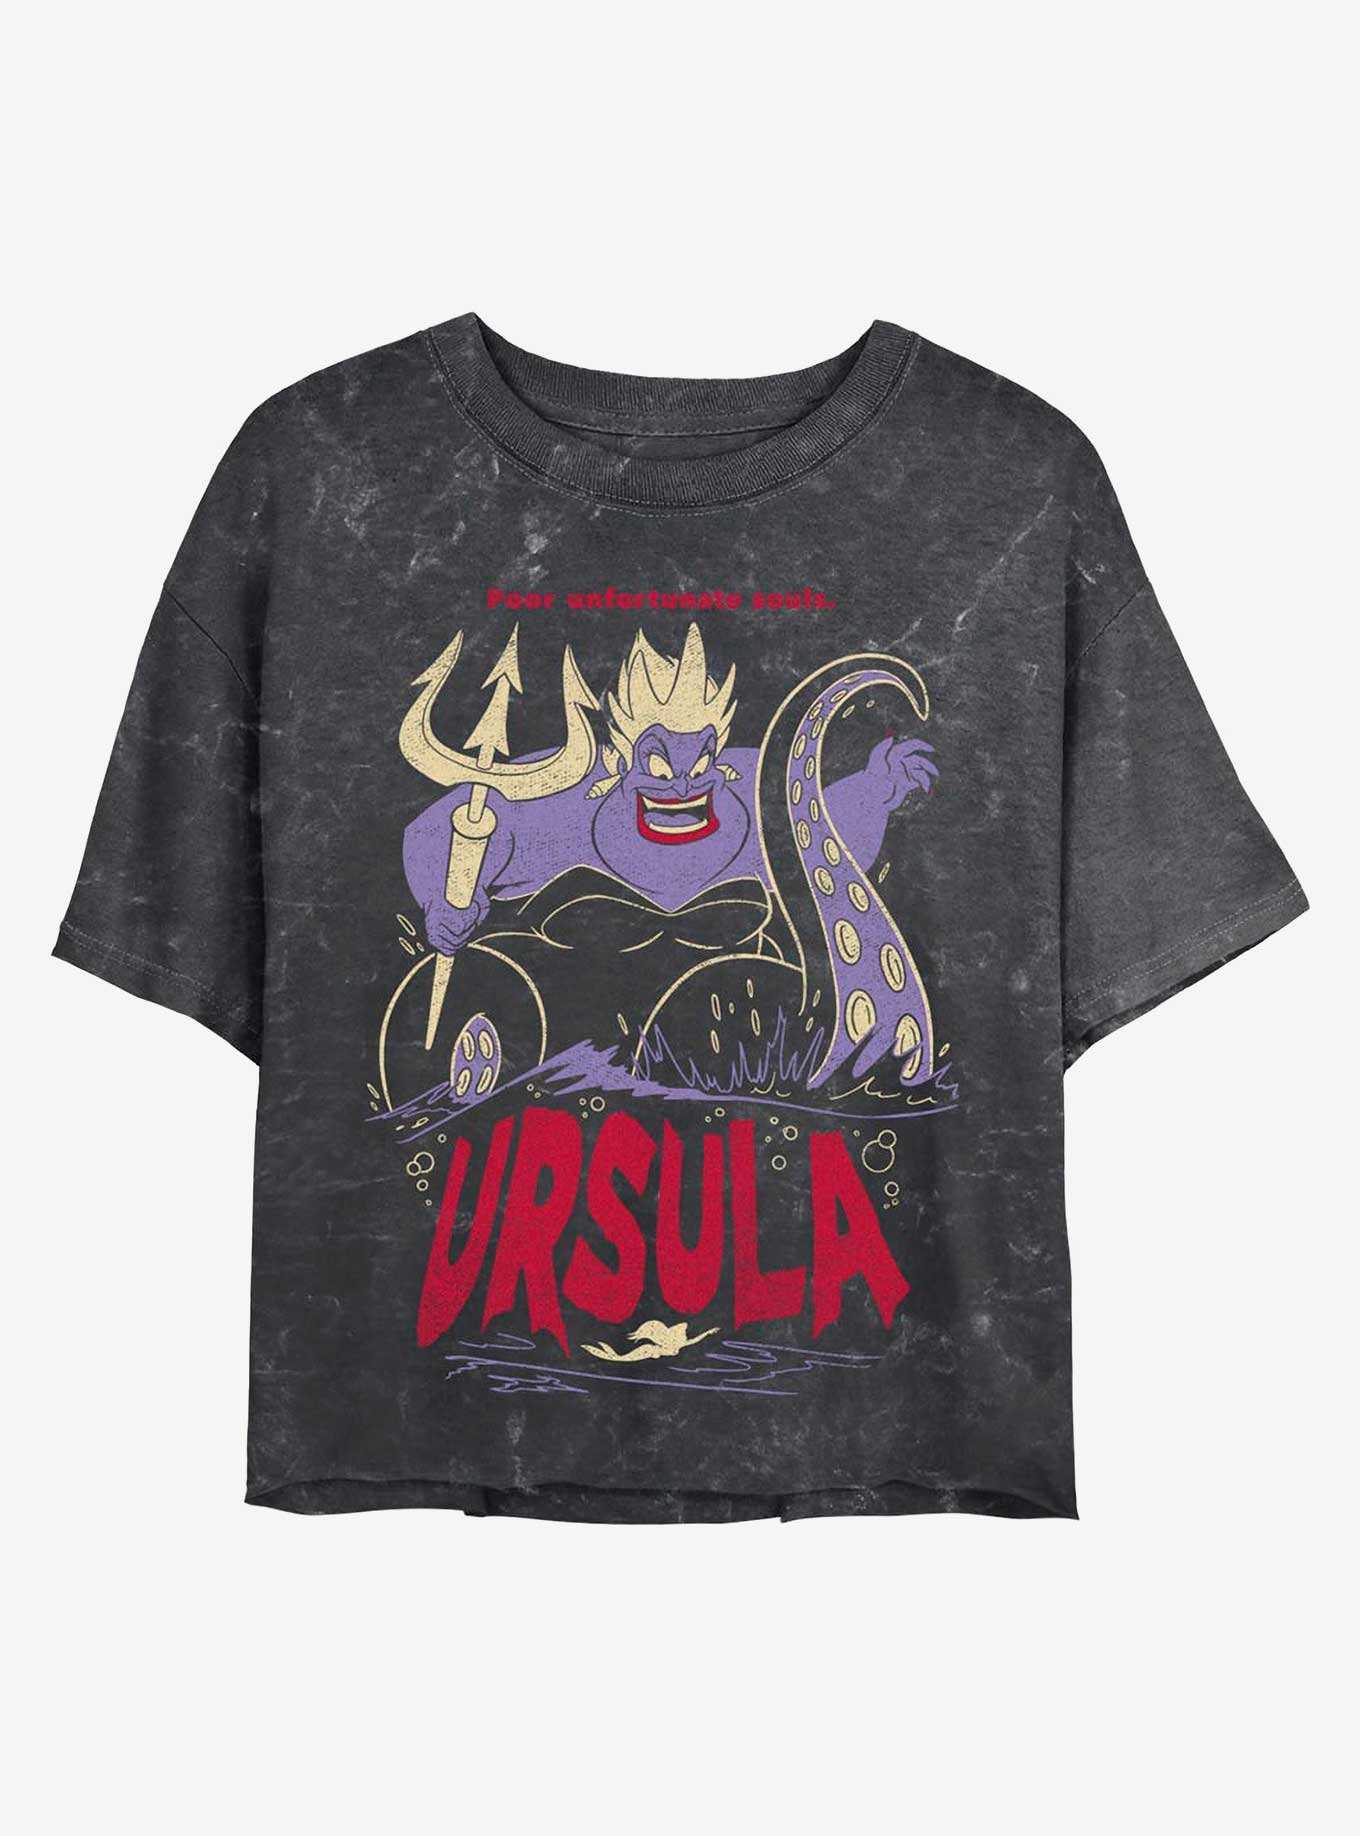 Disney The Little Mermaid Ursula The Sea Witch Mineral Wash Crop Girls T-Shirt, , hi-res